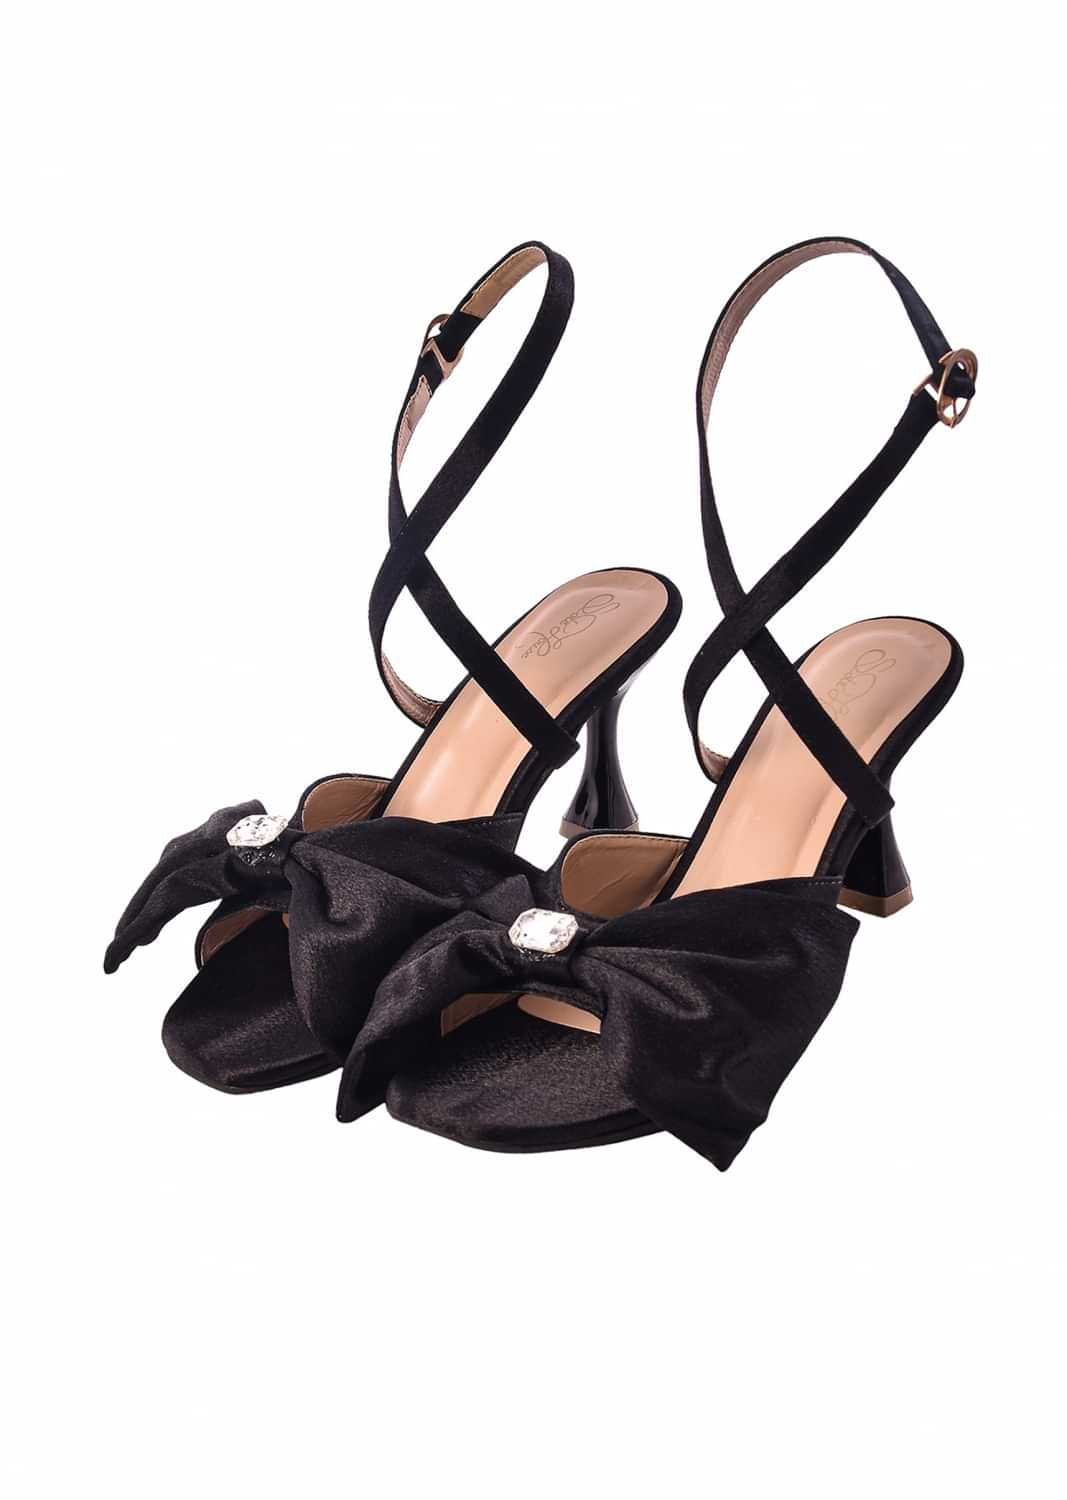 Solid Black 3-inch Pencil heels With Satin Bow And Gemstones